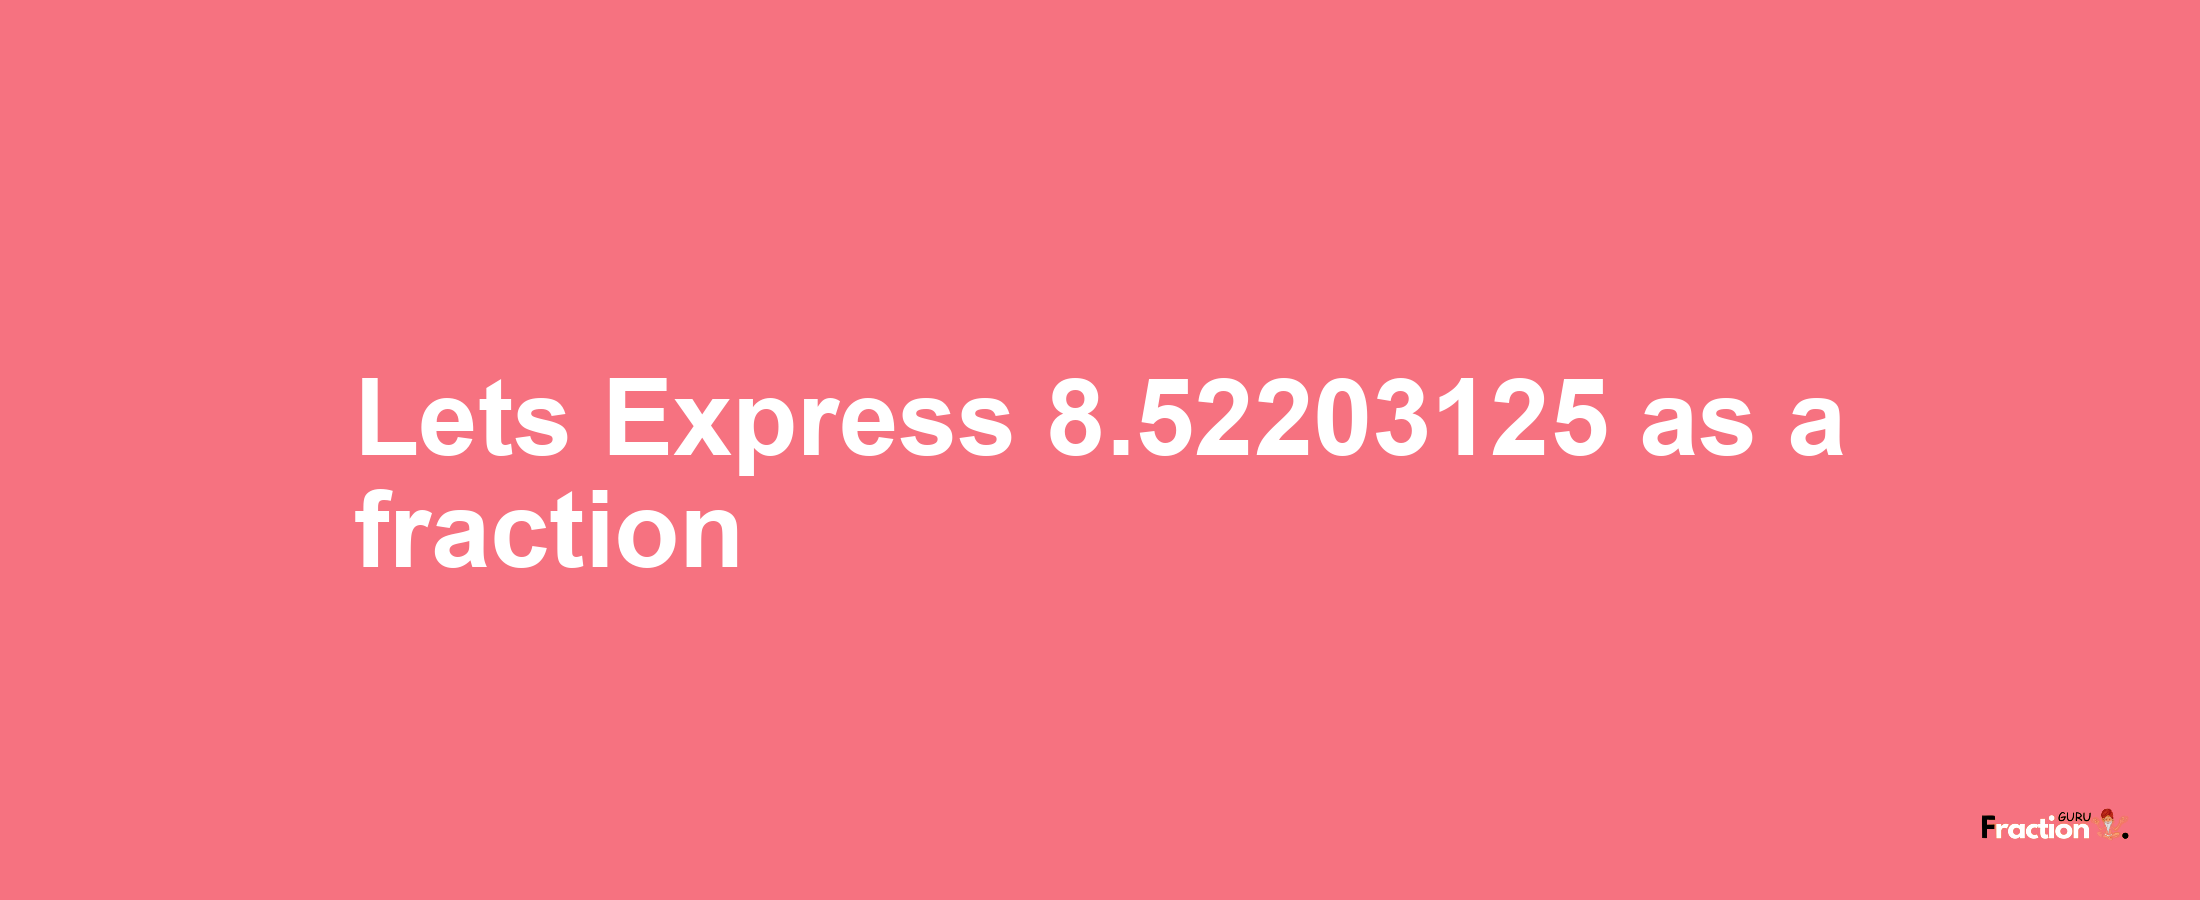 Lets Express 8.52203125 as afraction